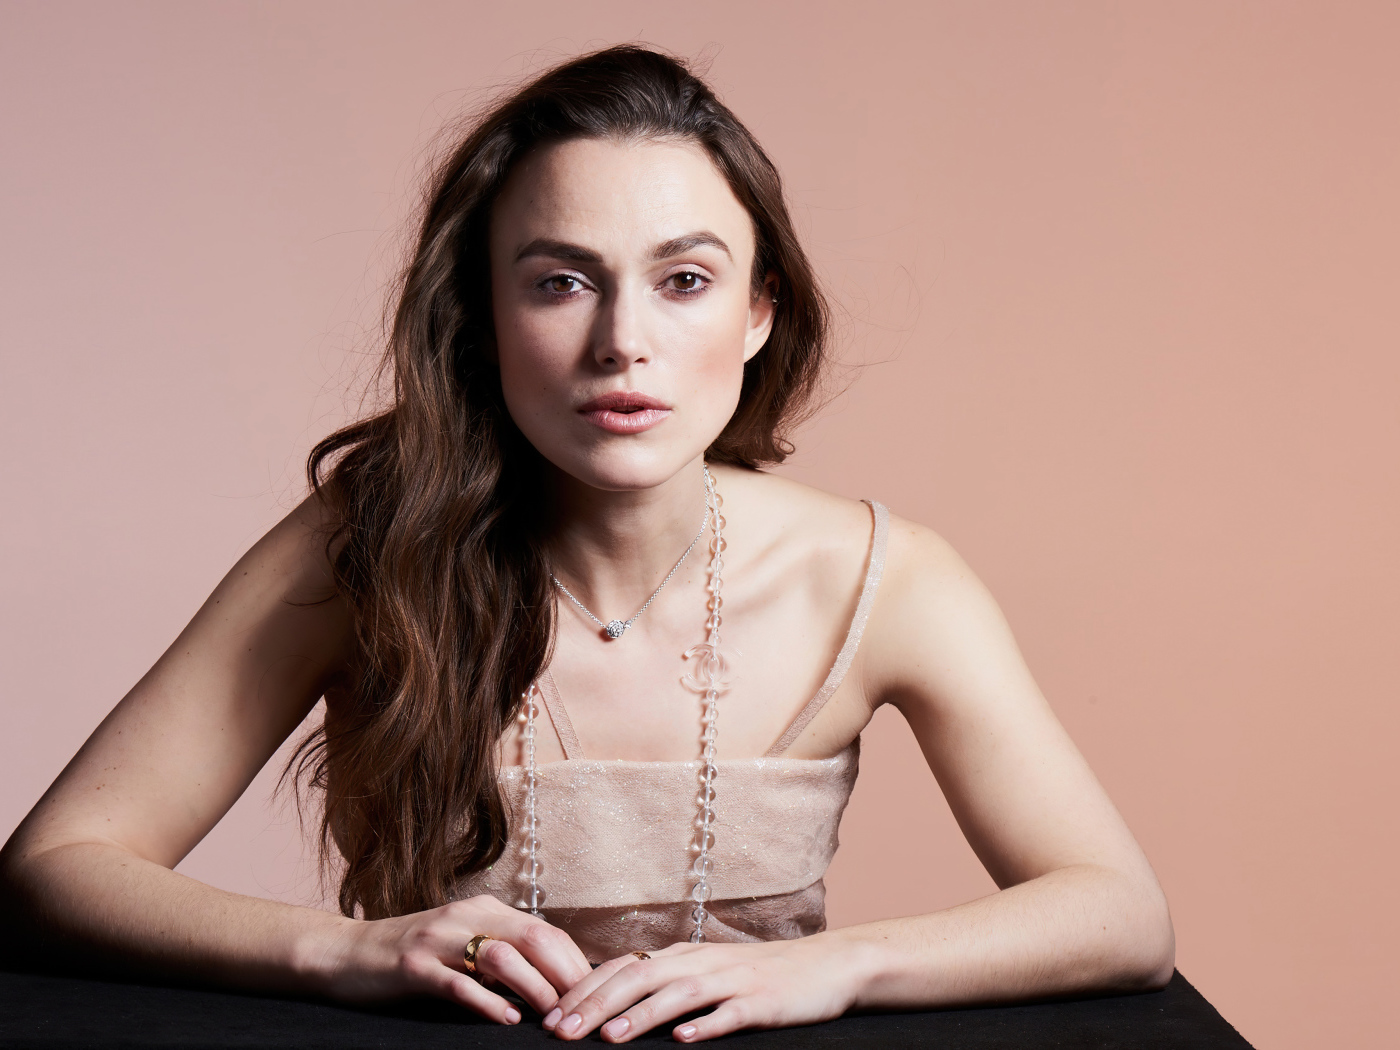 Actress Keira Knightley on a pink background